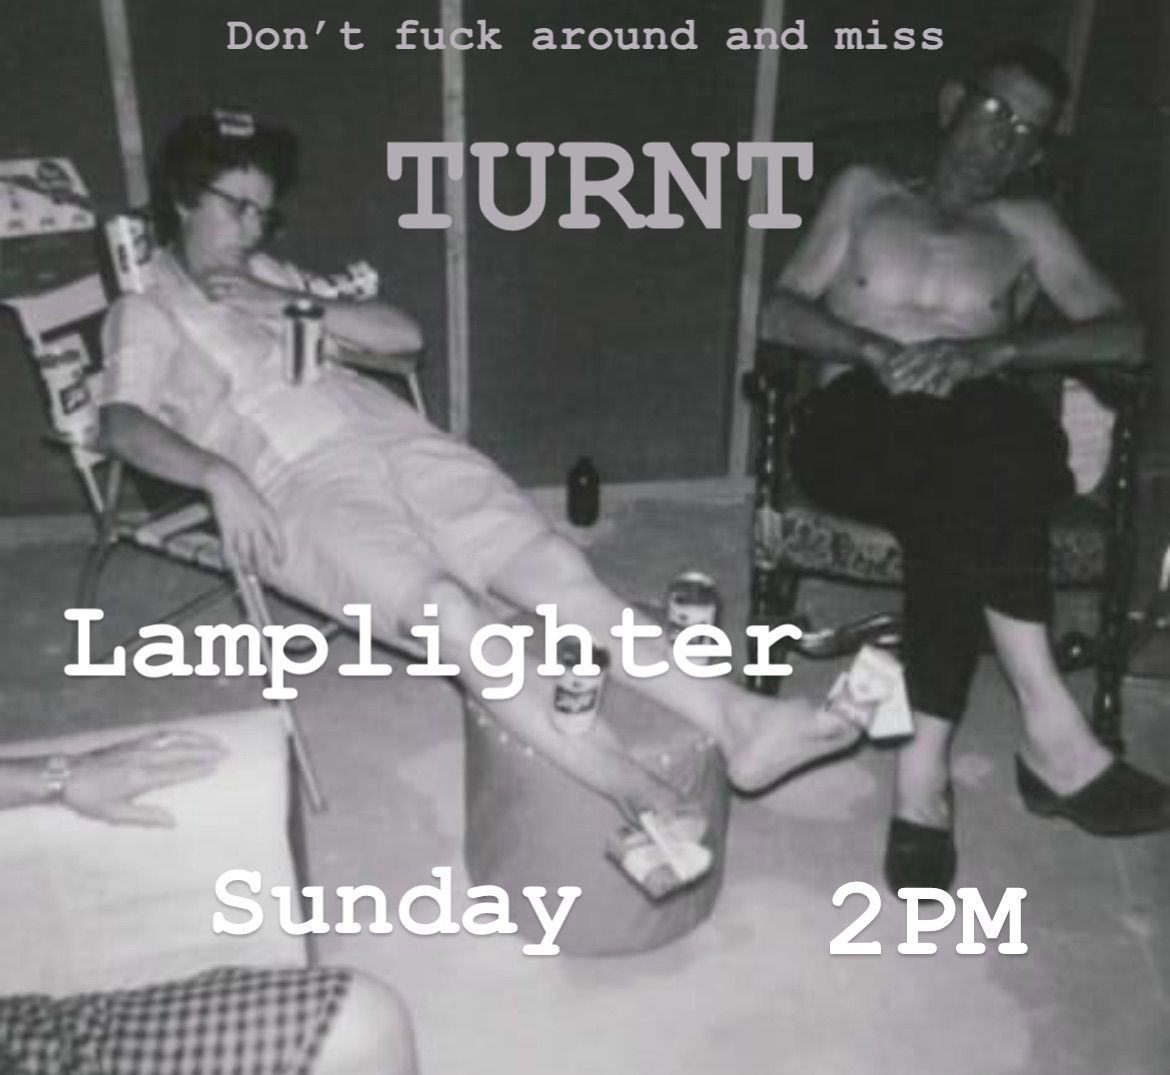 TURNT SUNDAY AT THE LAMPLIGHTER 